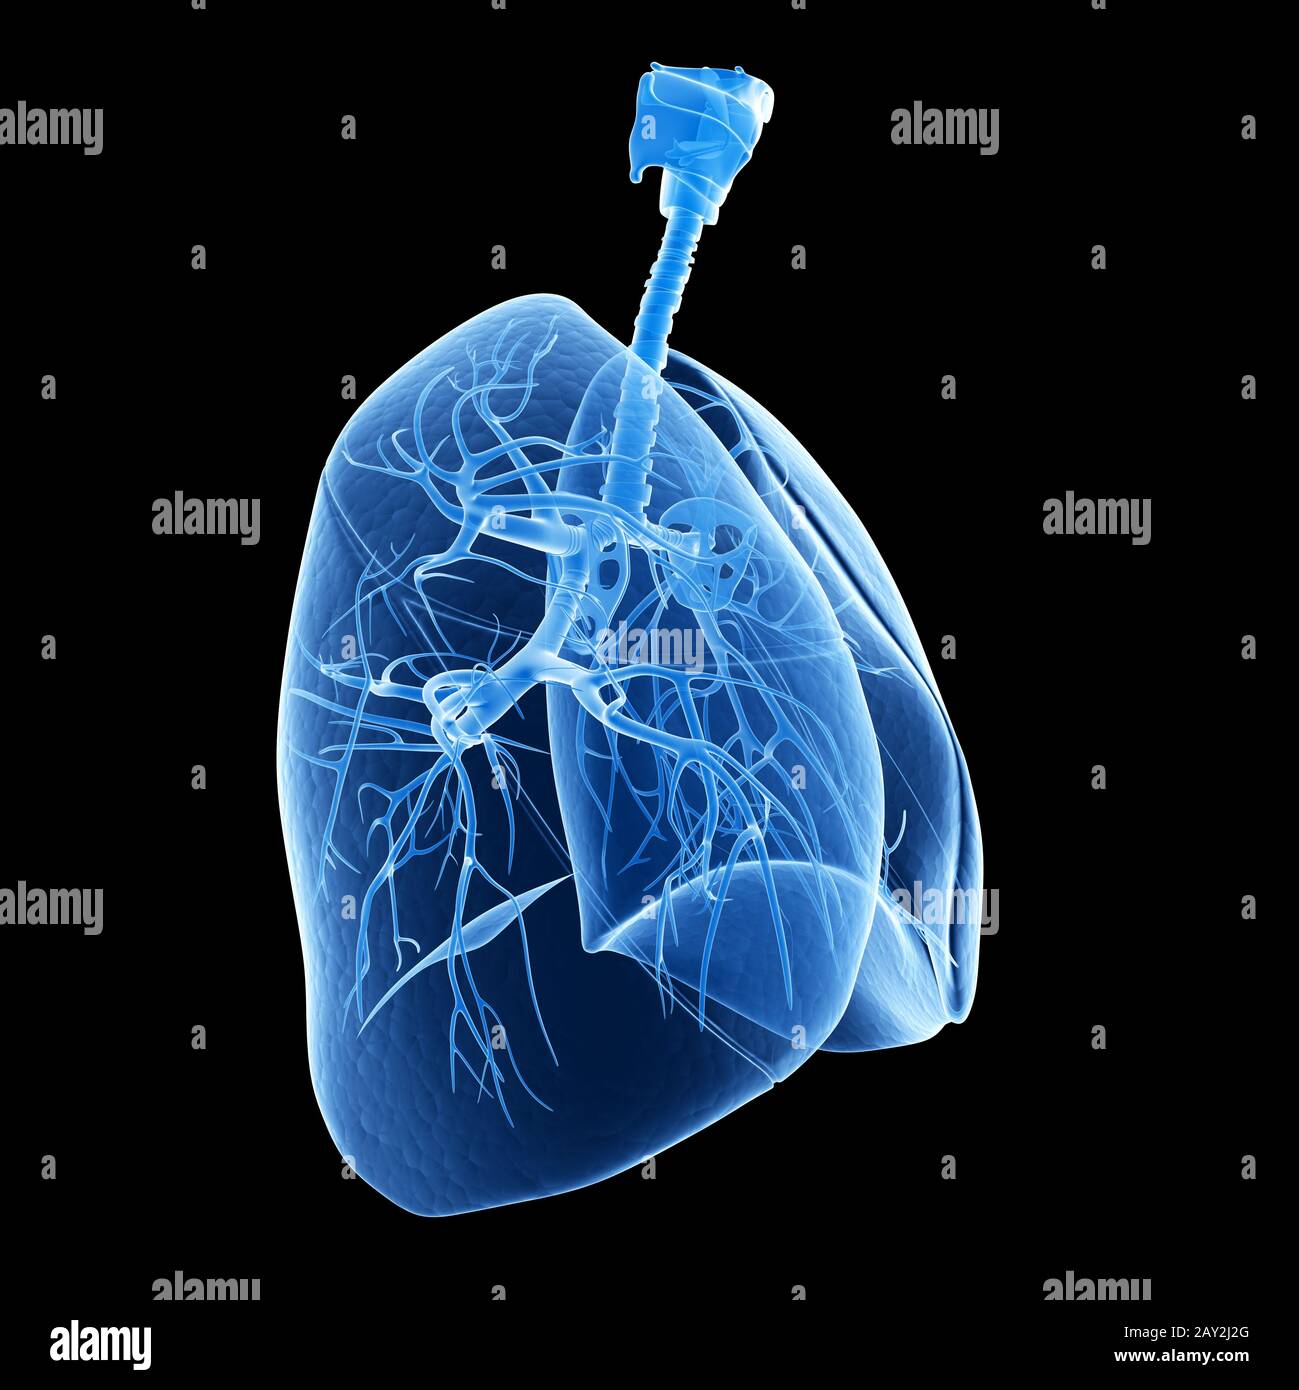 medical illustration of the human lung Stock Photo